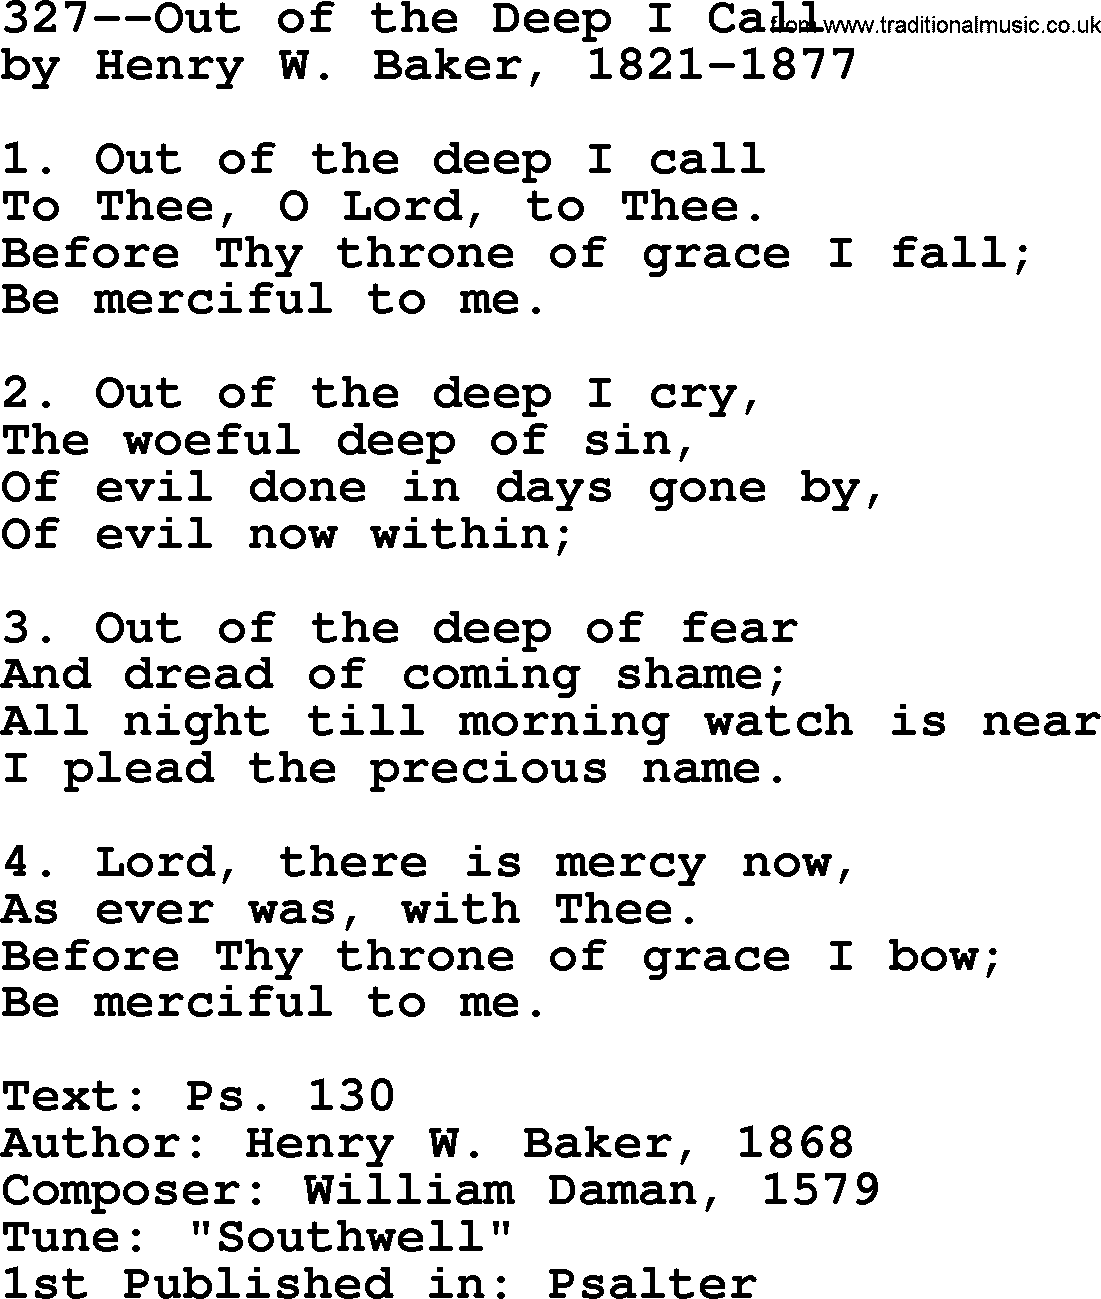 Lutheran Hymn: 327--Out of the Deep I Call.txt lyrics with PDF